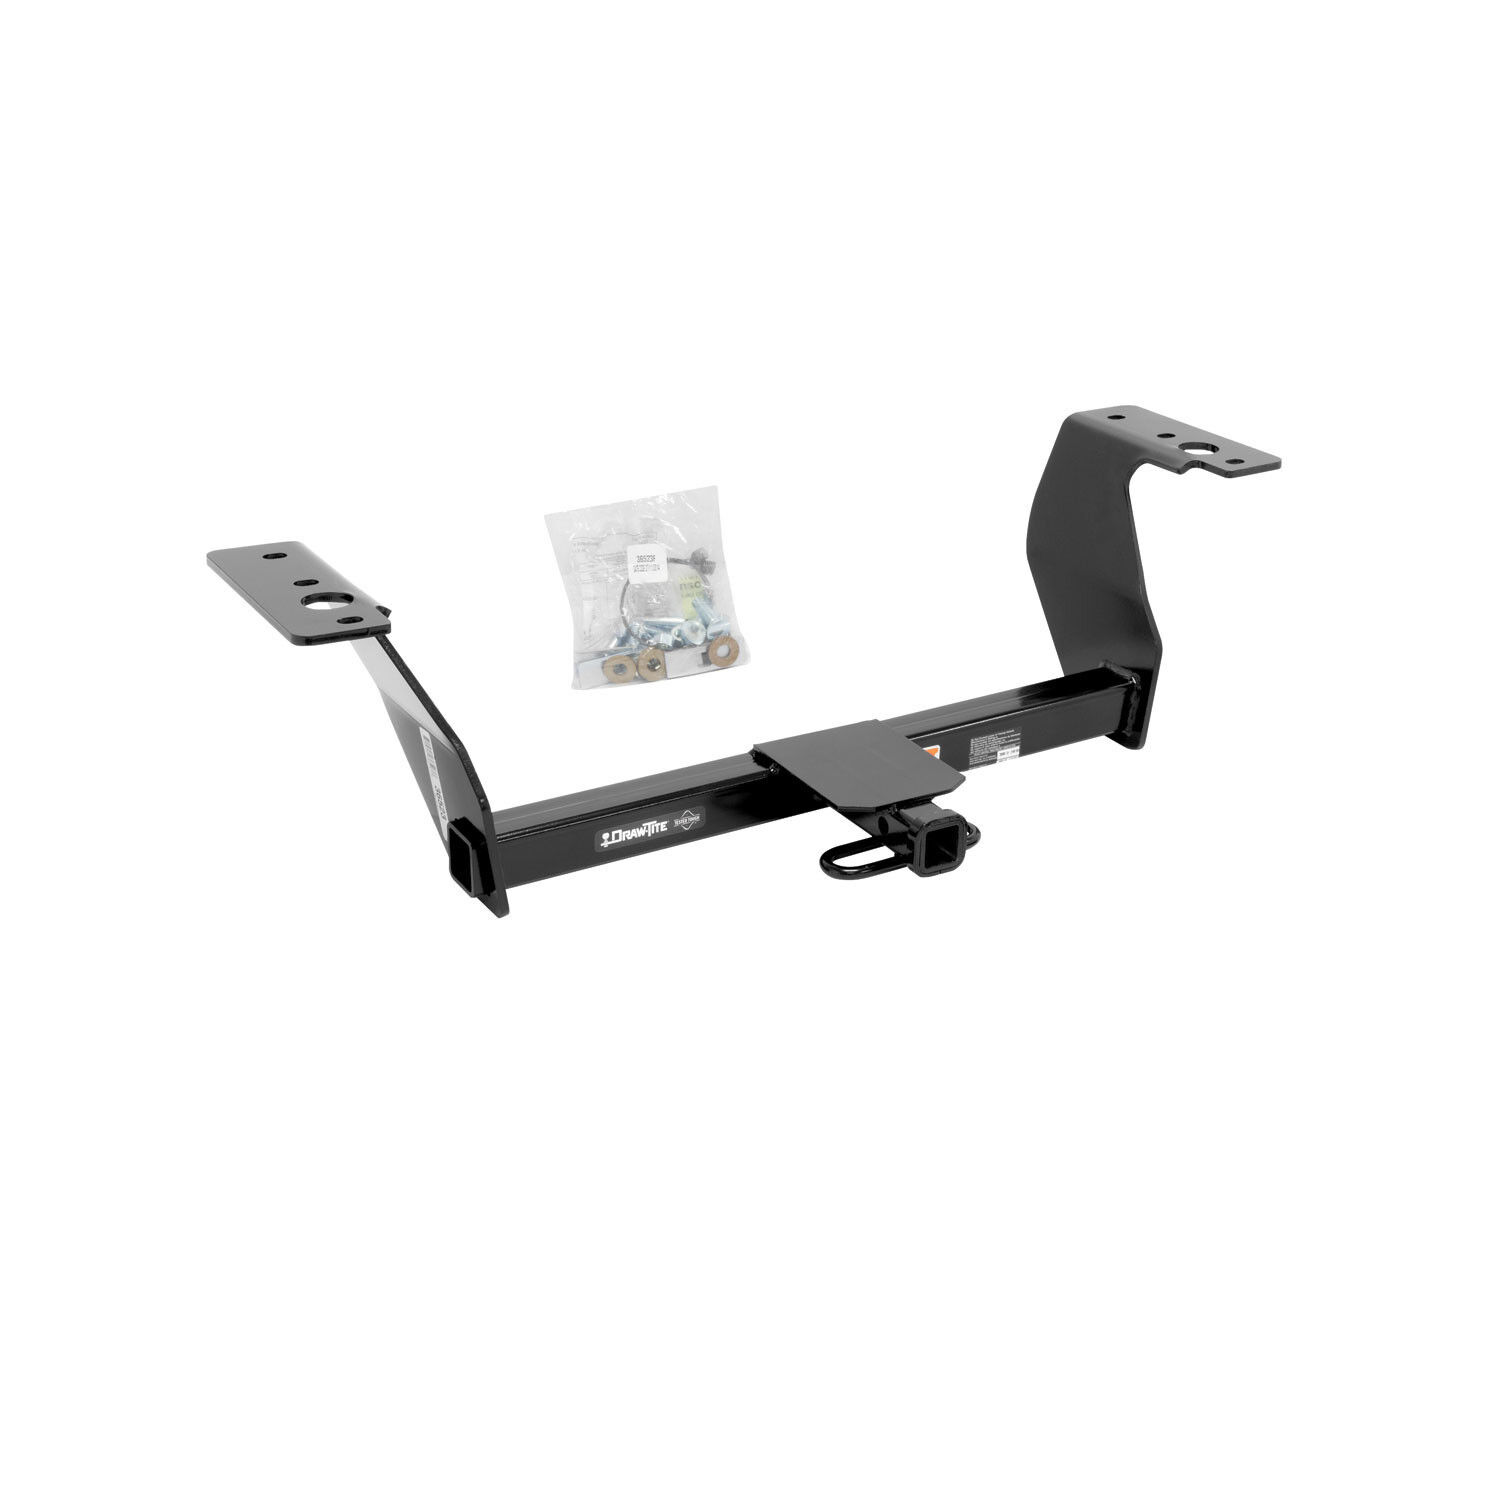 Trailer Fixed price for sale Today's only Hitch Rear Draw-Tite 36523 Subaru 14-18 fits Forester